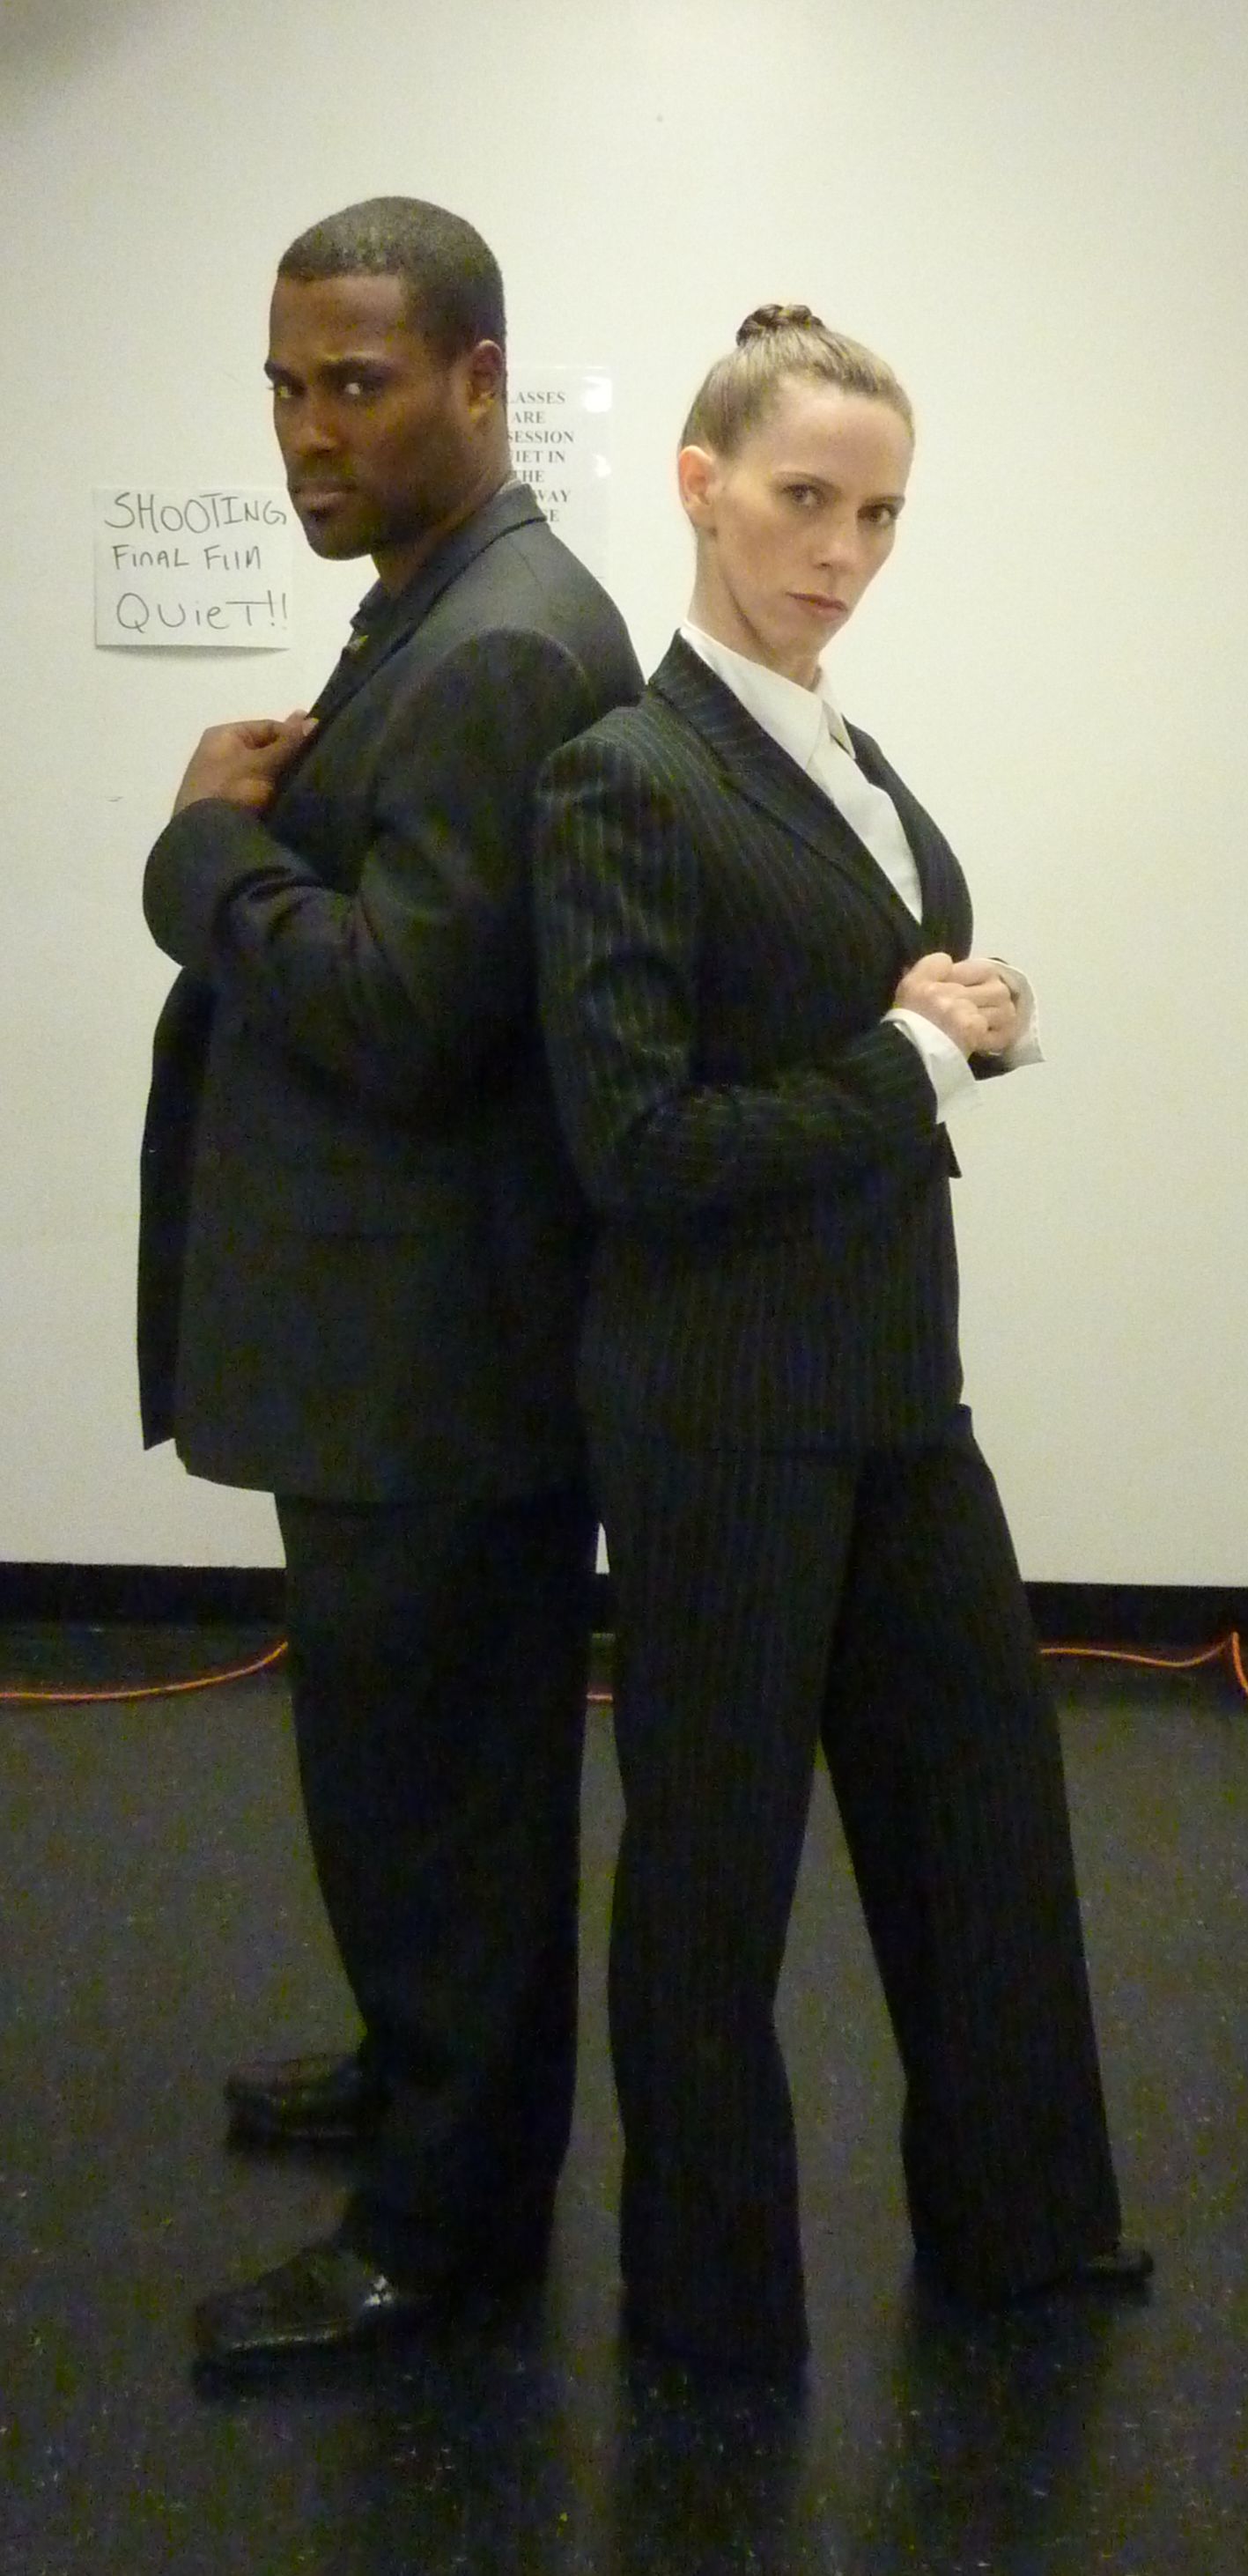 Rosemarie Griffin and Phillip Polite New York Film Academy Production March, 2010